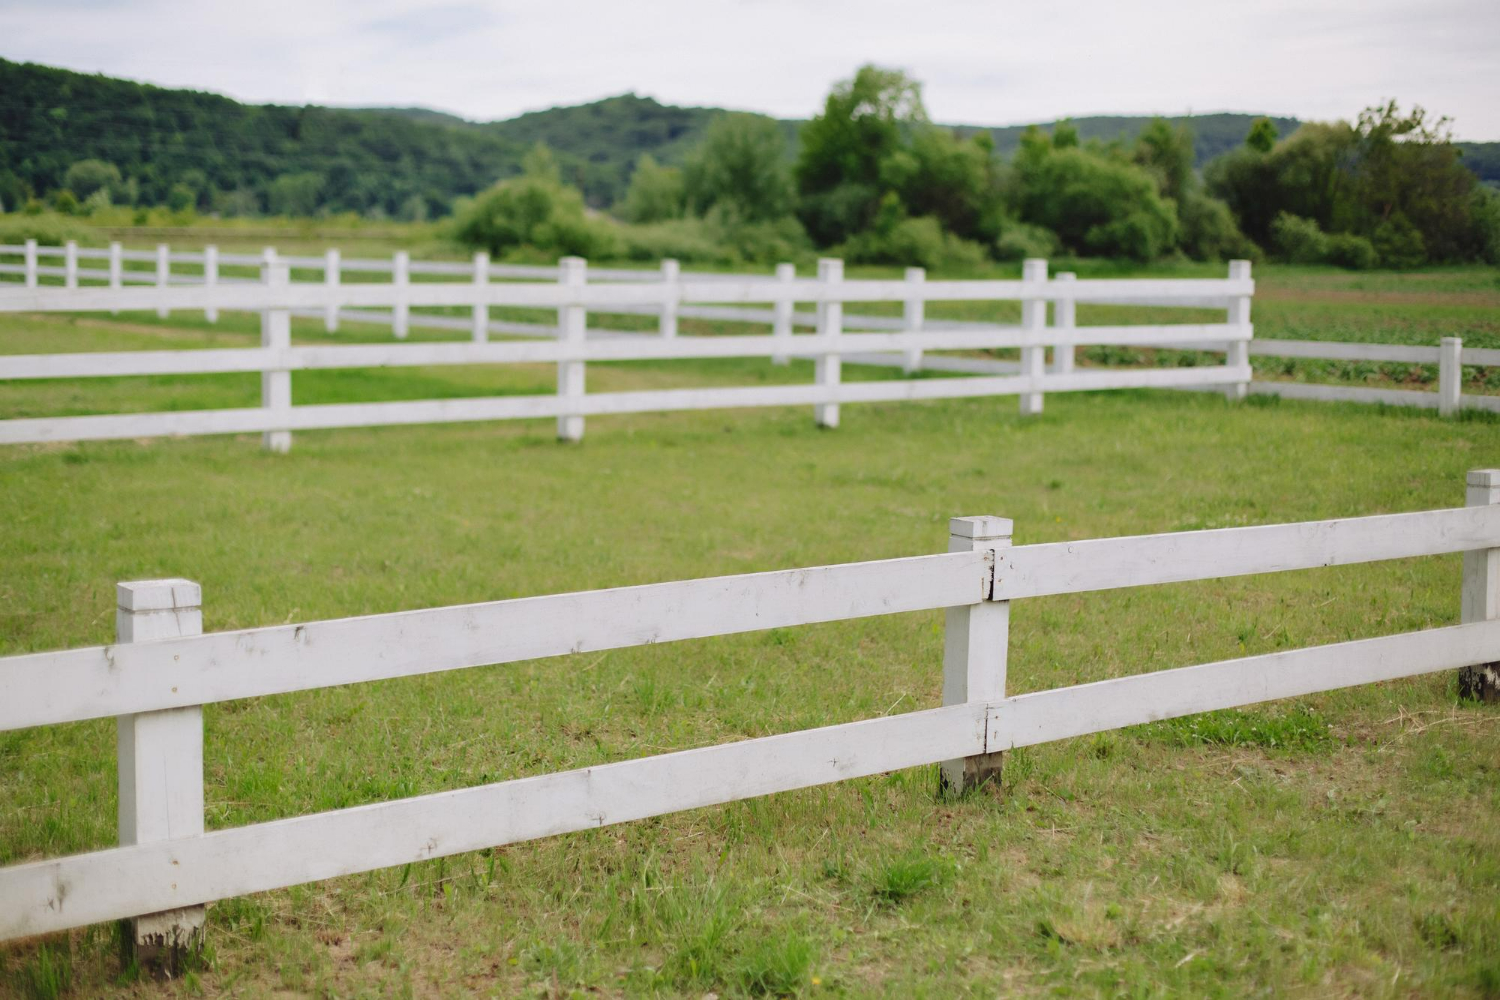 Simple ways to renovate chain link fencing in your property